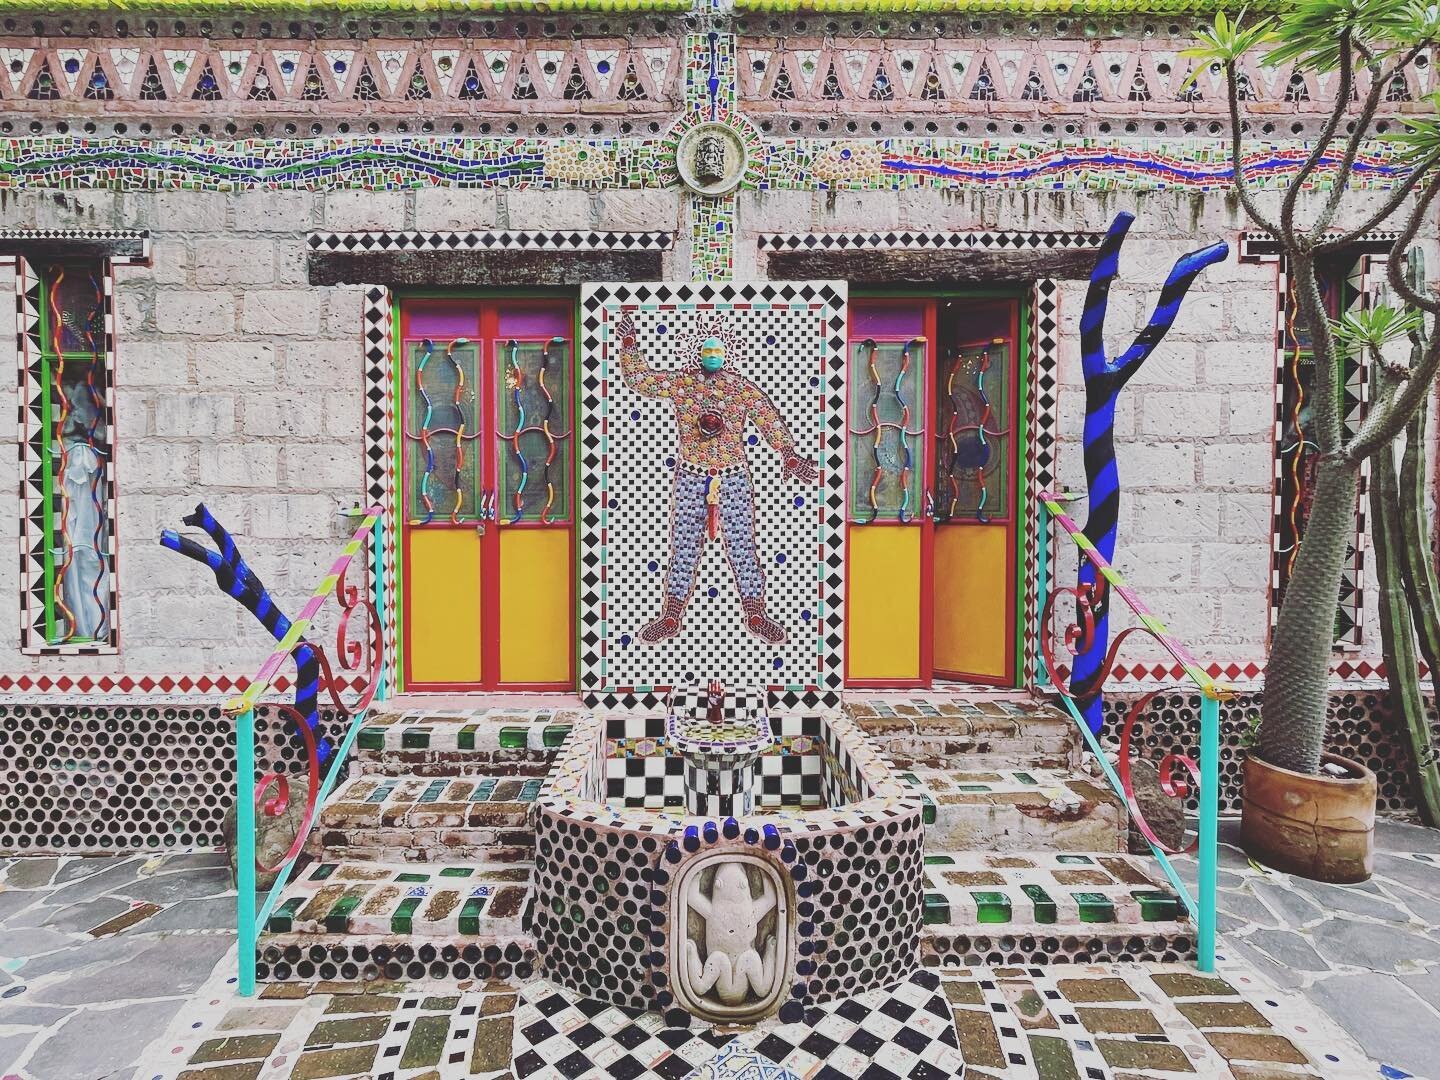 If you&rsquo;re planning a trip to San Miguel de Allende and are looking for something fun and unusual to do, be sure to set some time aside for a visit to the Chapel of Jimmy Ray. The mosaic wonderland filled with art and assemblages by the late art